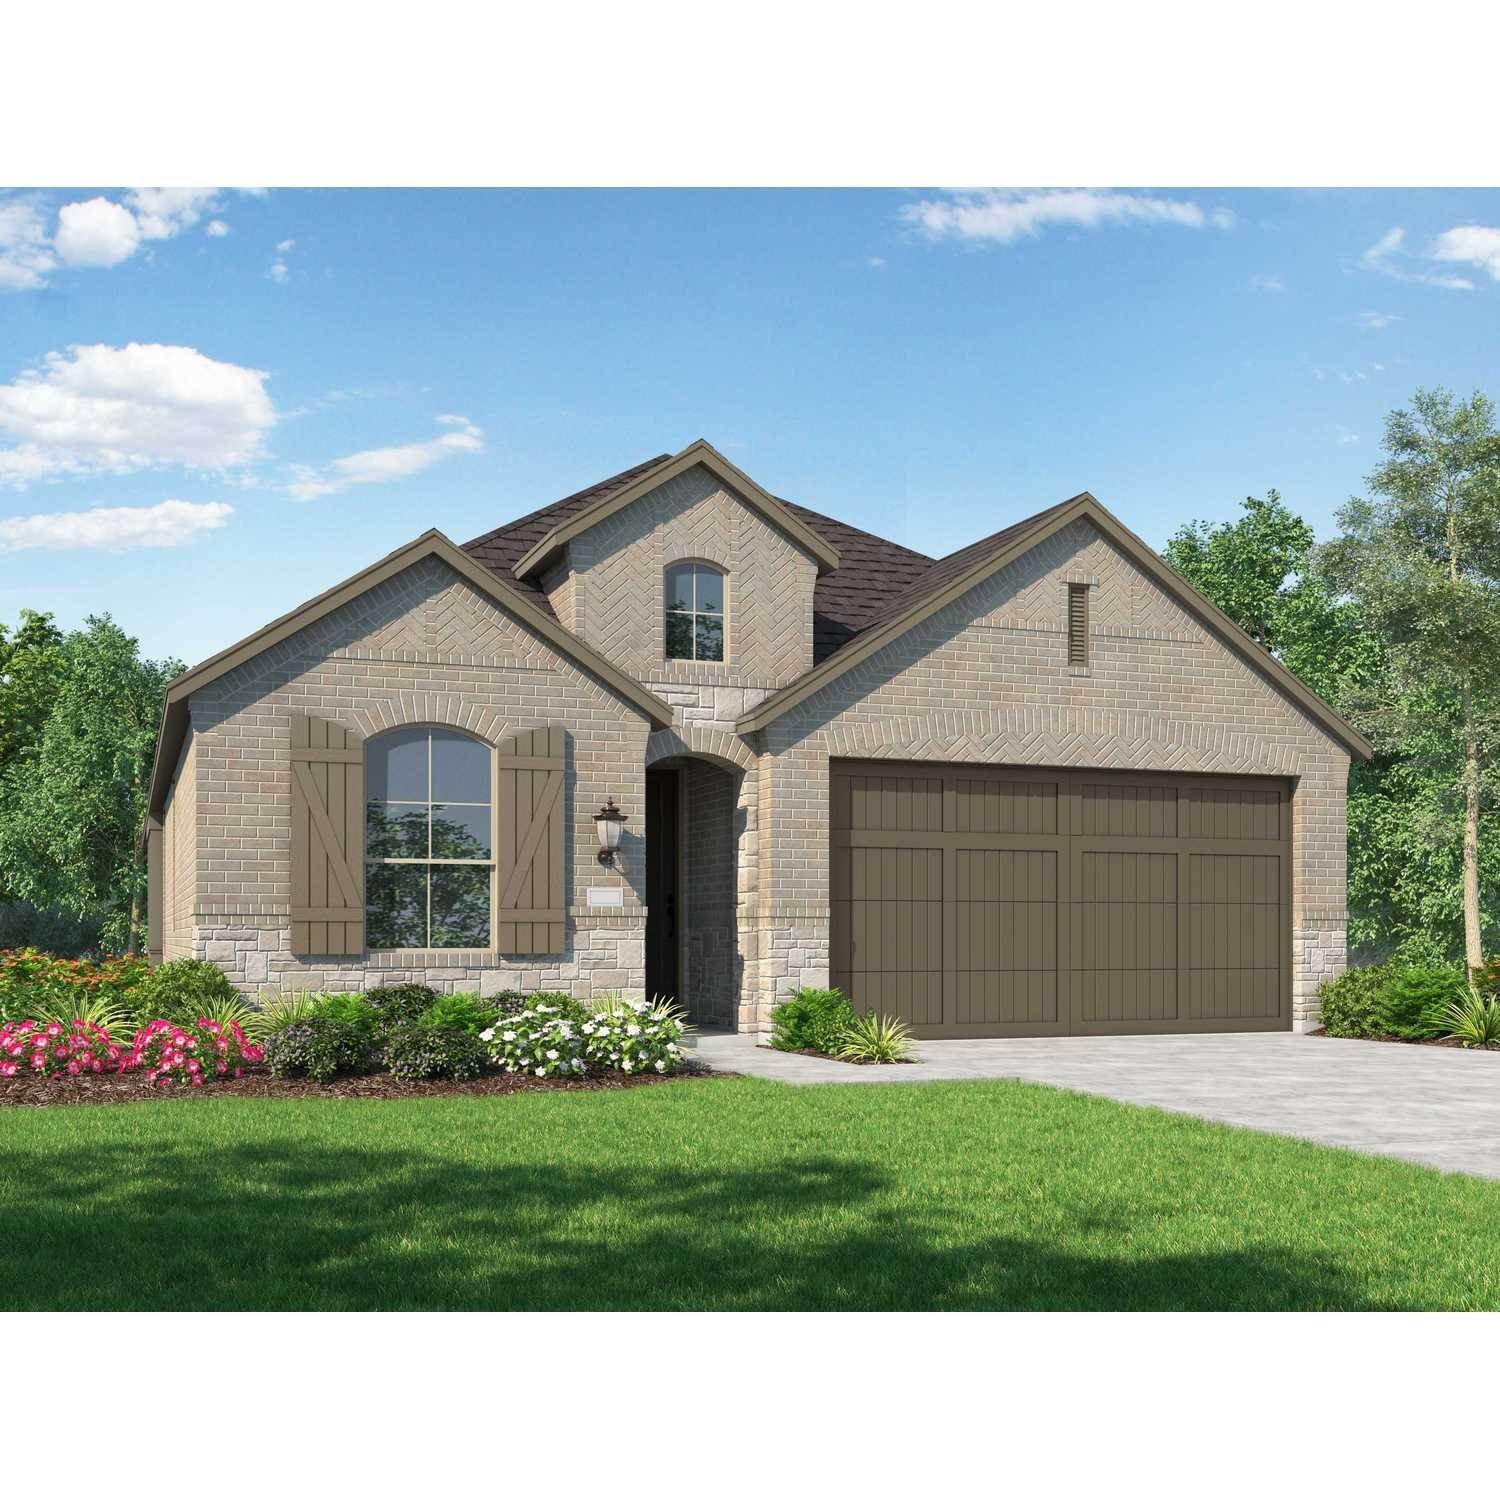 Single Family for Sale at Artavia: 45ft. Lots 17710 Fernweh Court, Conroe, TX 77302